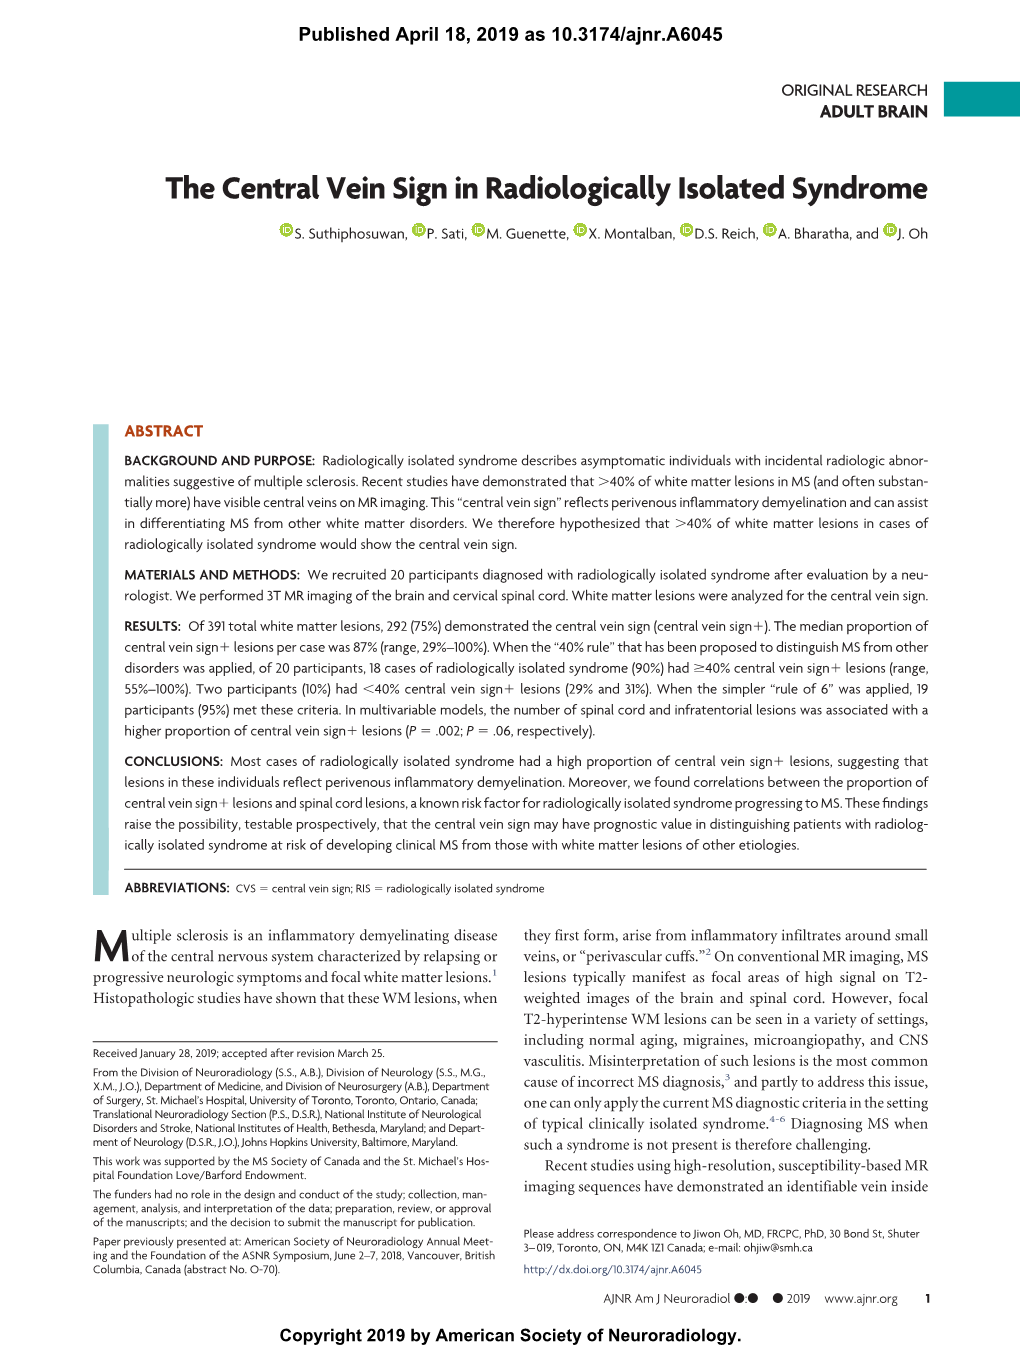 The Central Vein Sign in Radiologically Isolated Syndrome